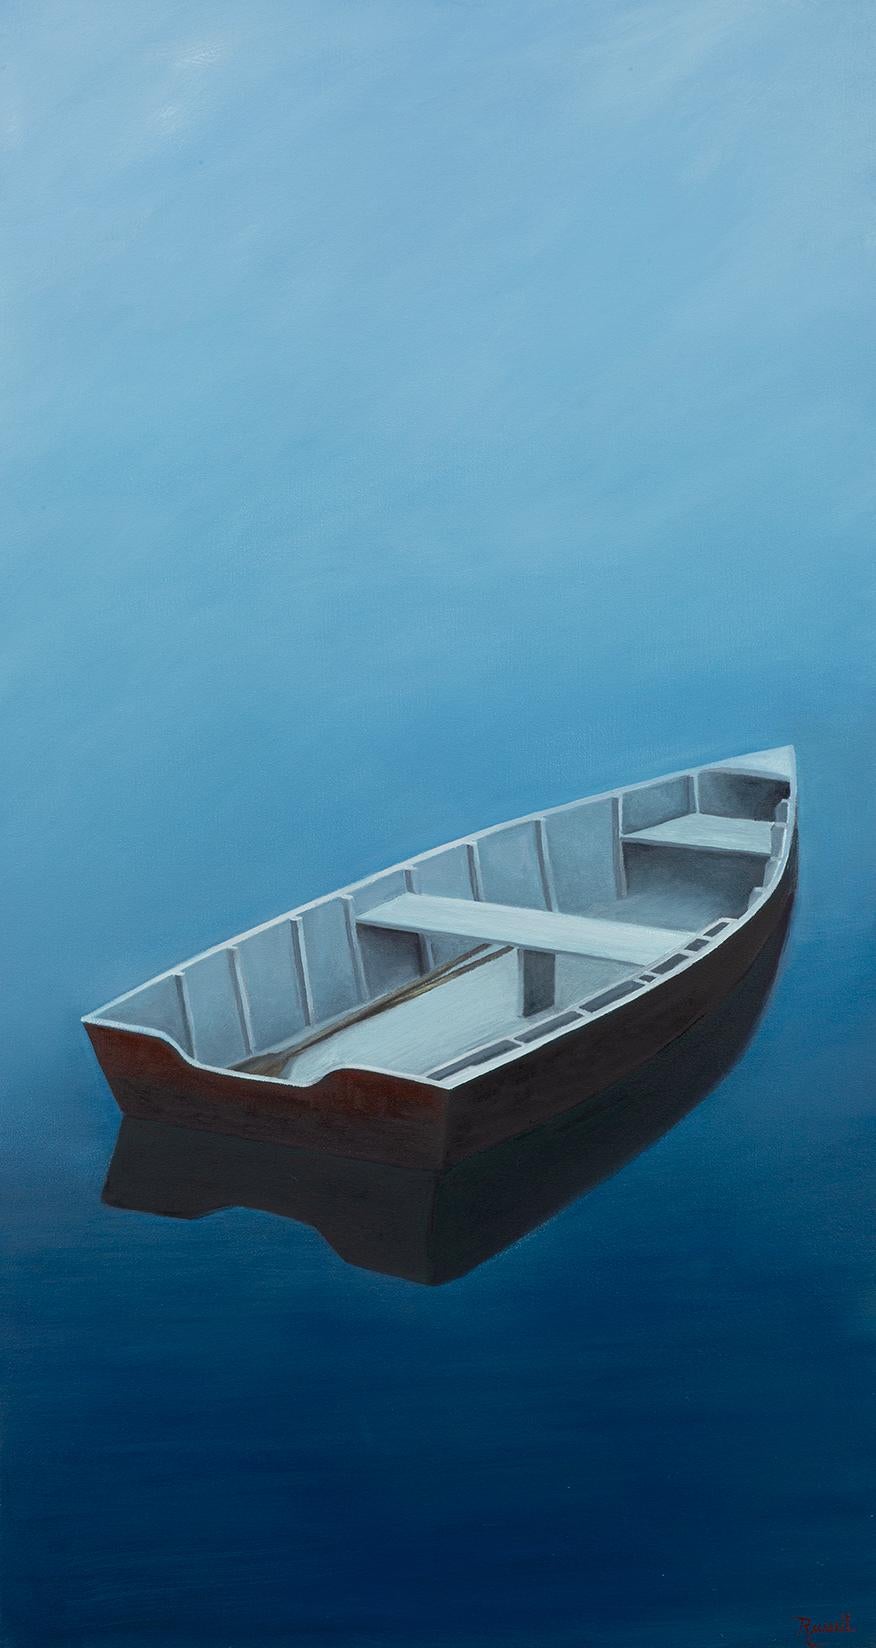 "Dockside" is a 48x24 oil painting on canvas by artist Matthew Jay Russell, featuring a single dark red dory boat floating on calm deep blue water. The empty vessel gives a sense of calm in front of low-lit dusk skies. The receding tide leaves